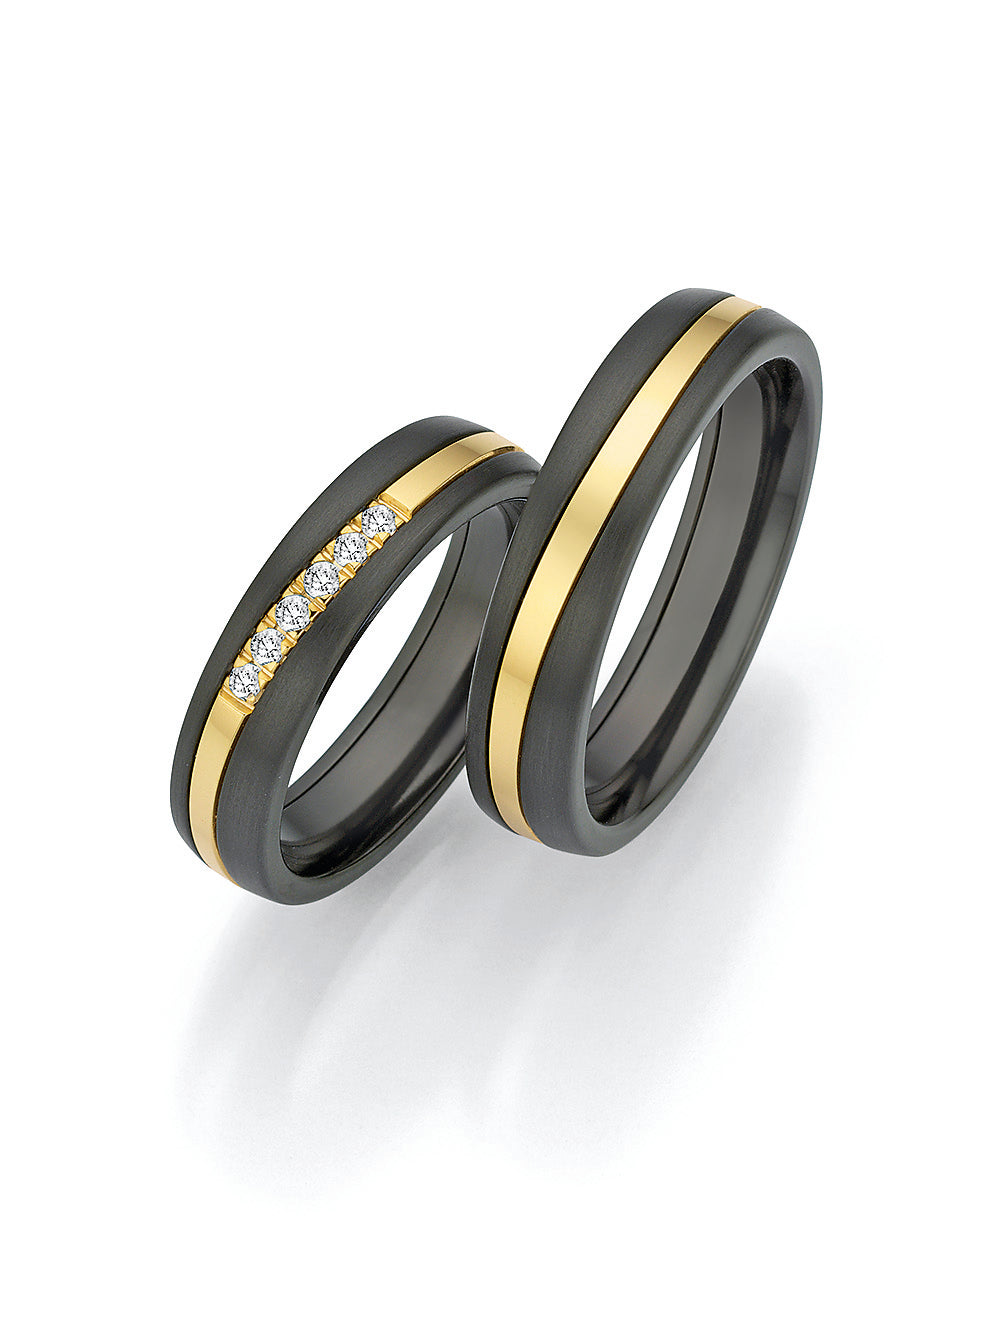 Surfing Colors Wedding Ring with 14K Gold & Zirconium